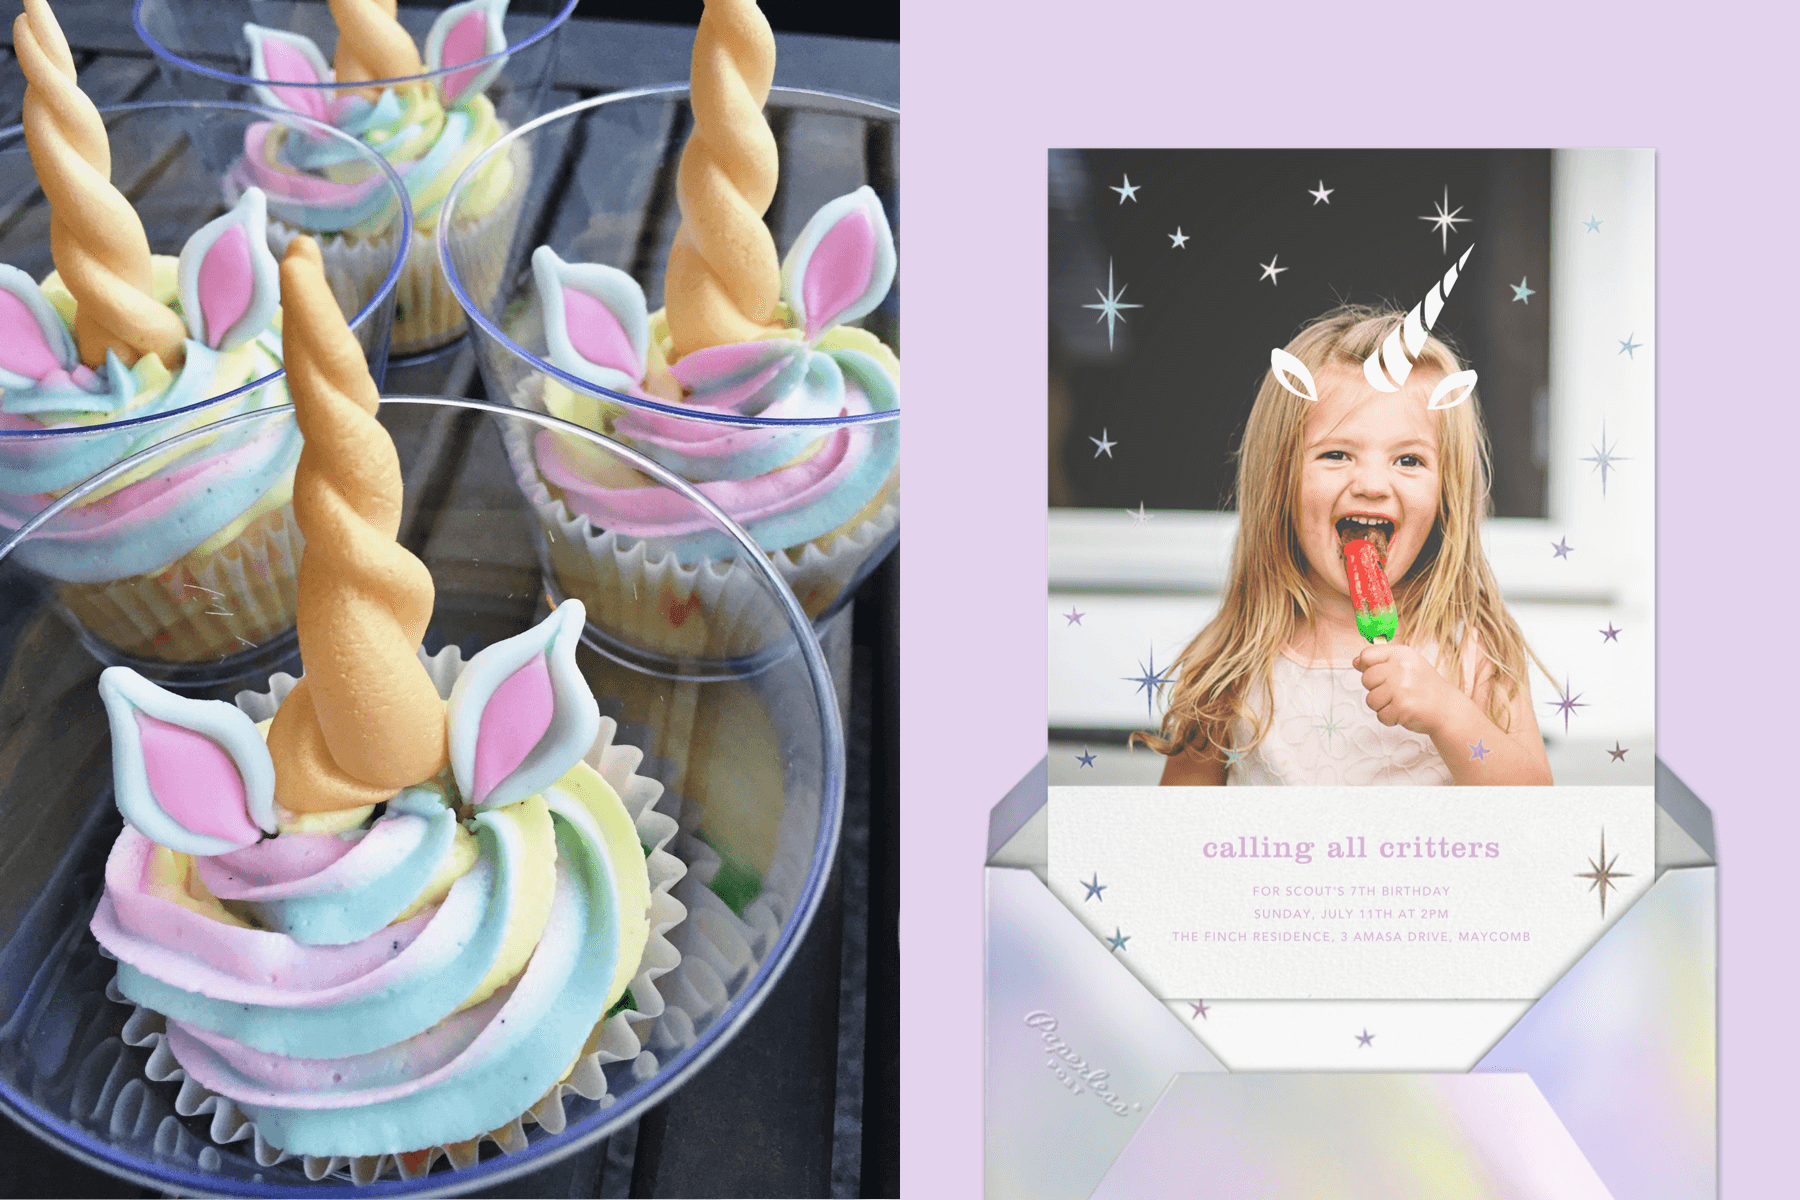 Left: Rainbow cupcakes with unicorn ears and horns. Right: An invitation with a photo of a young girl and illustrated unicorn ears and horn.